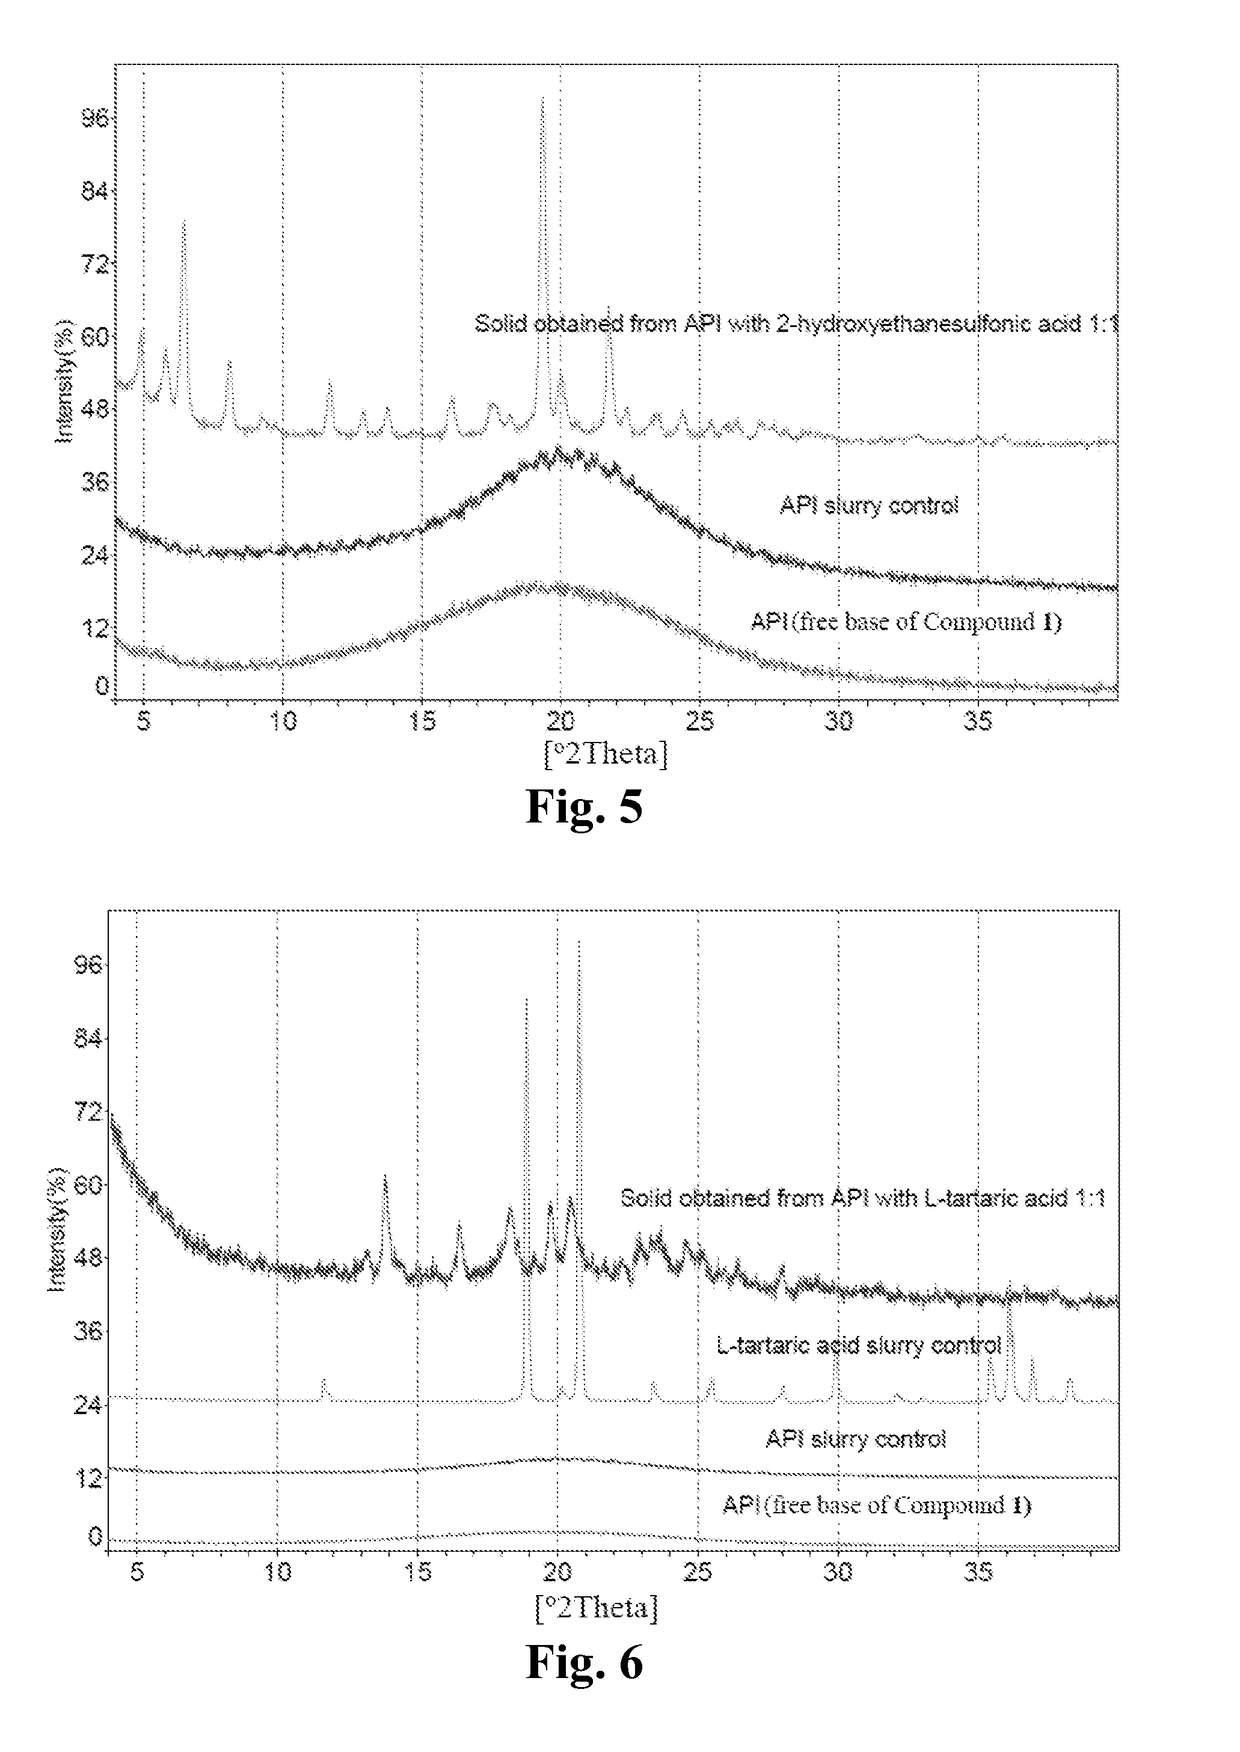 Maleate salts of a b-raf kinase inhibitor, crystalline forms, methods of preparation, and uses therefore